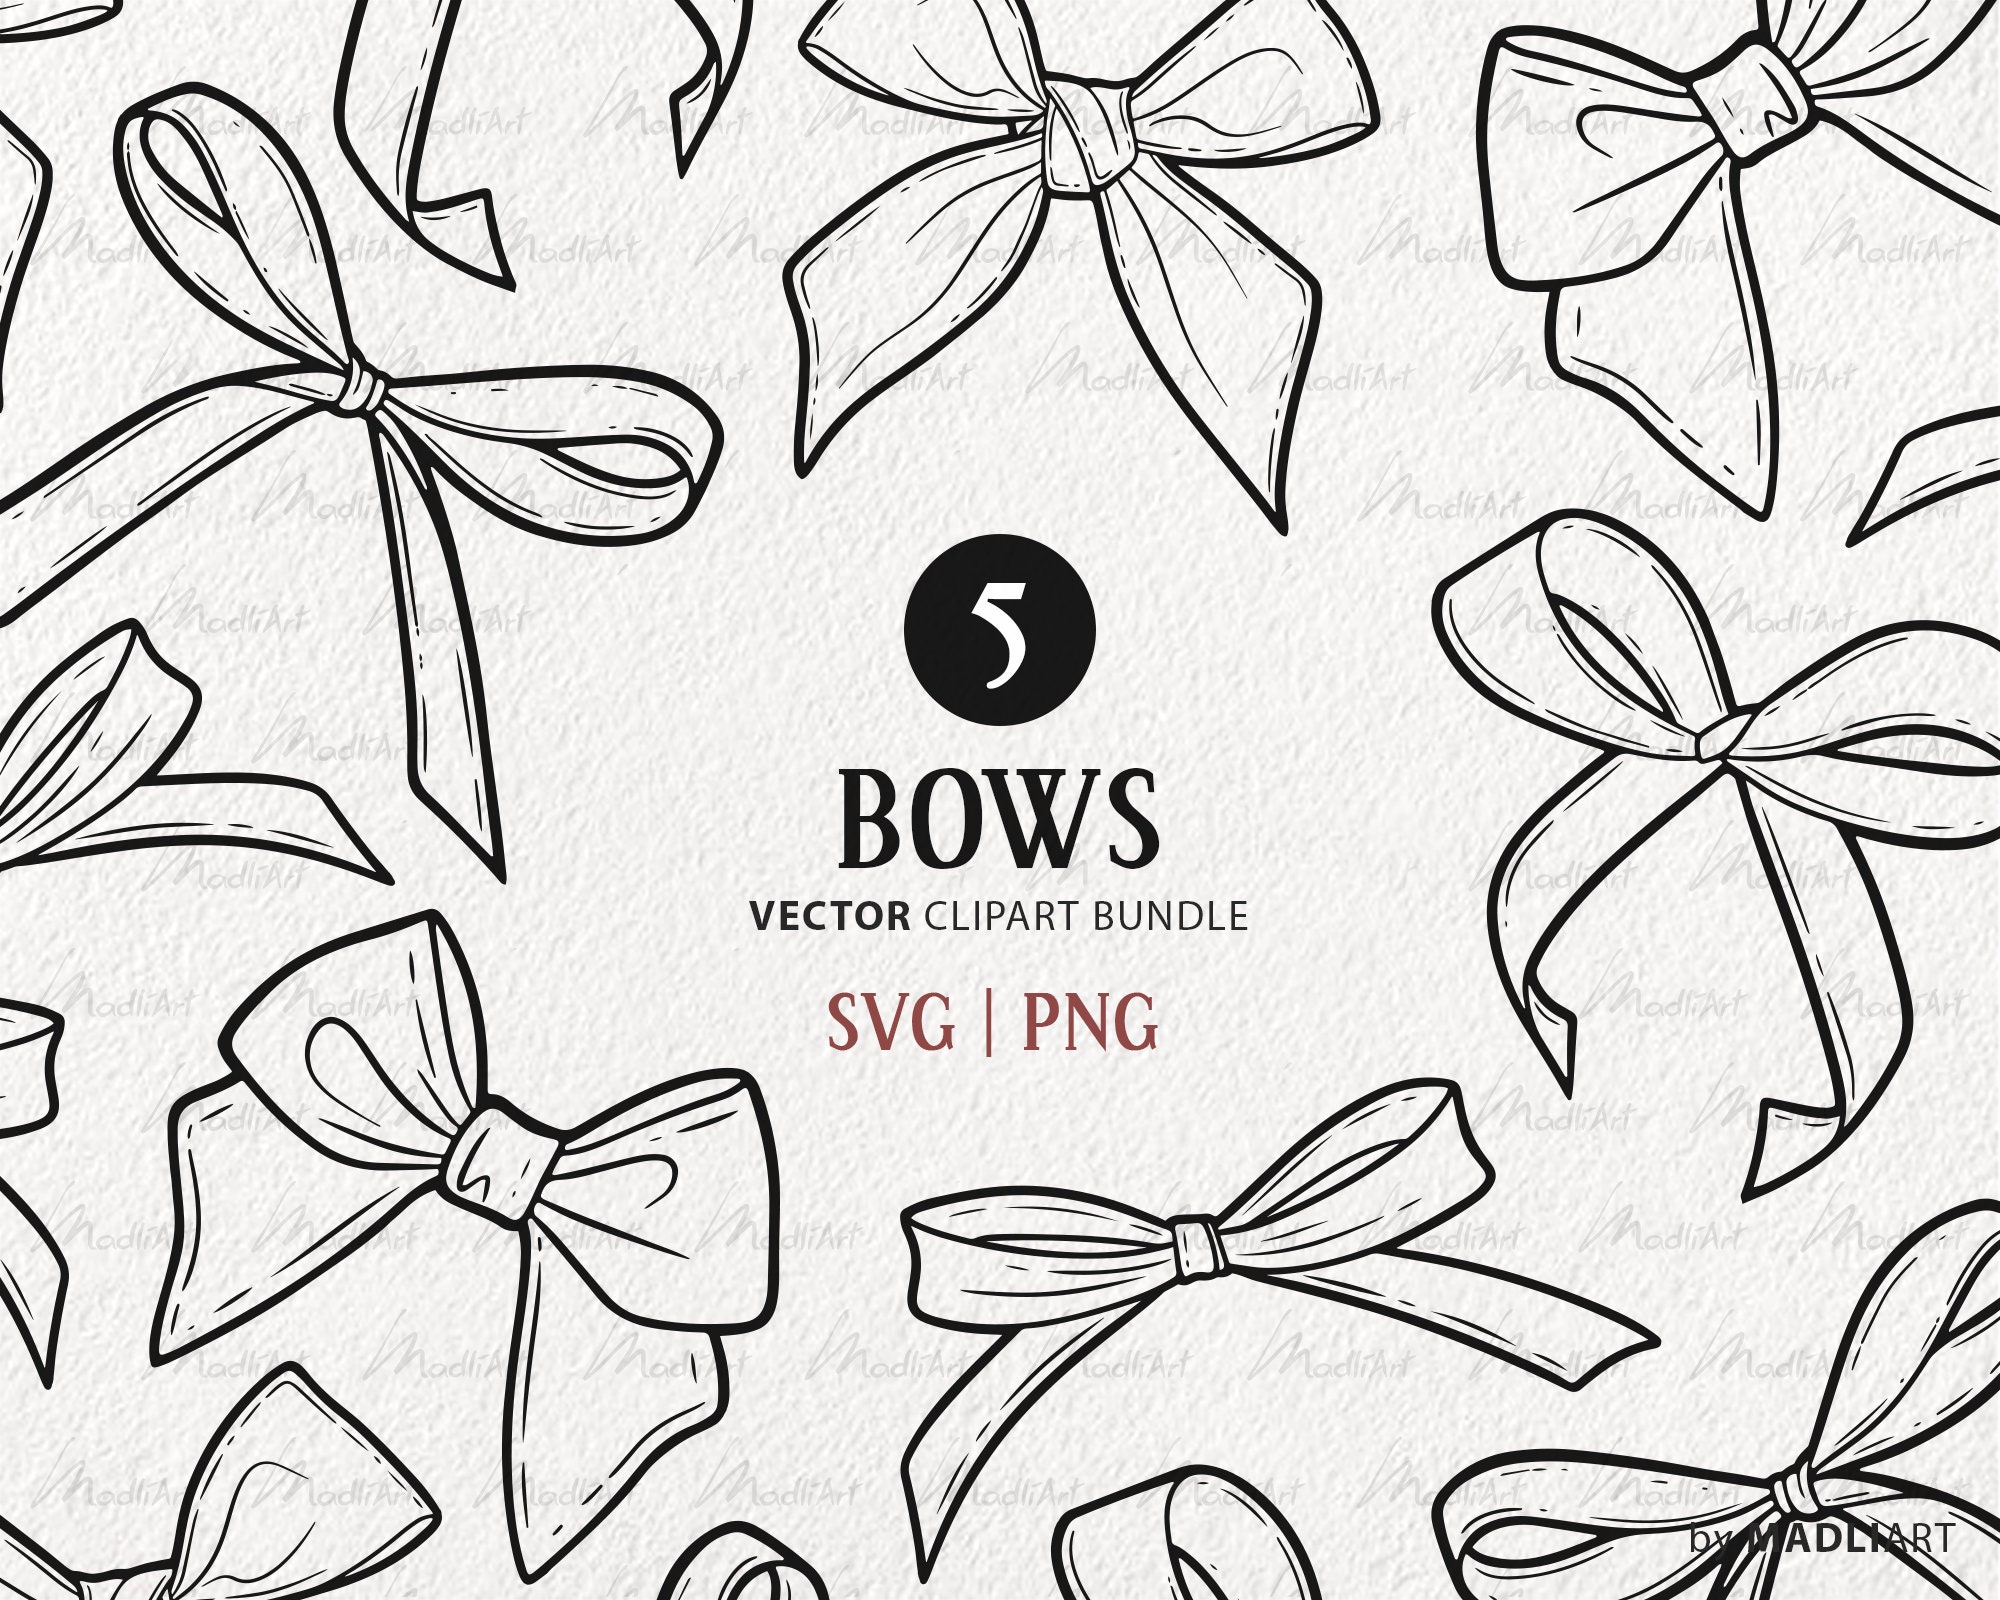 Ribbons and Bows Clip Art, Hand Drawn Bow PNG, Christmas Bow, Gift Bows,  Holiday Bows, Outline for Coloring, for Invitation, Holiday Cards -   Denmark